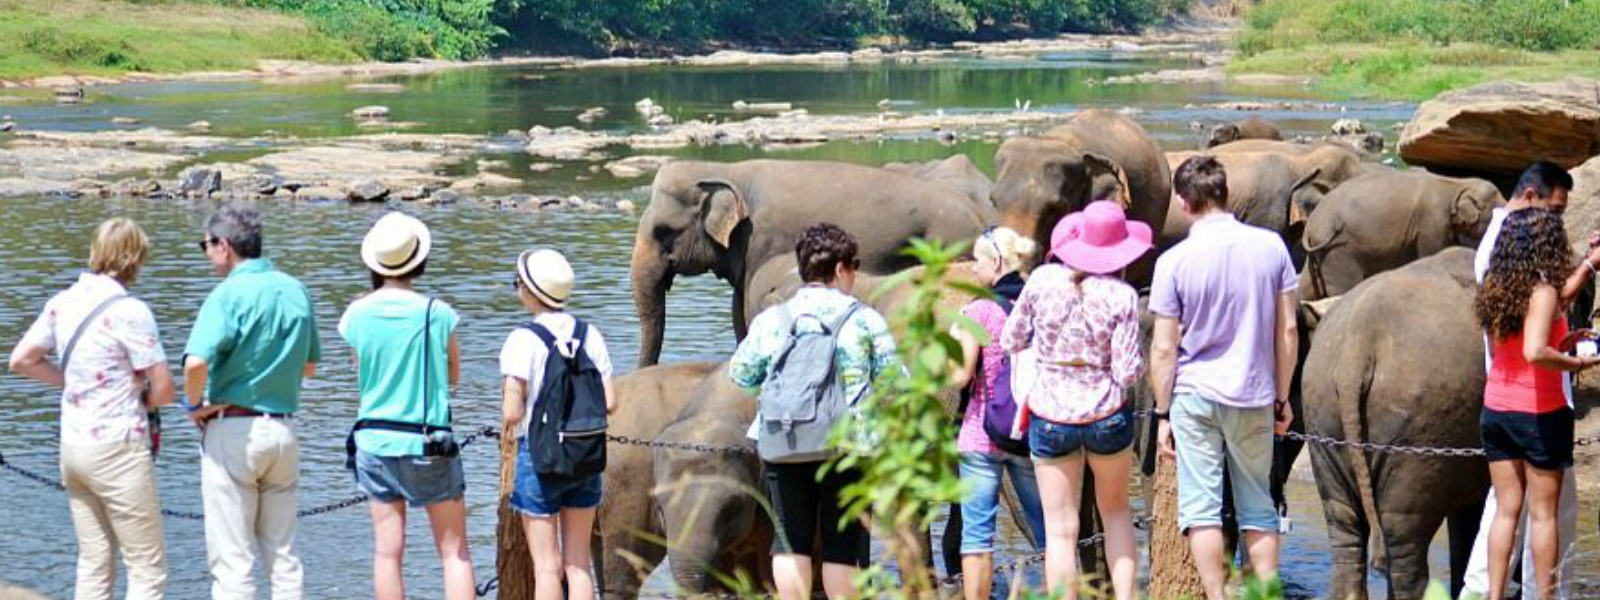 Sri Lanka to boost tourism with tourism villages